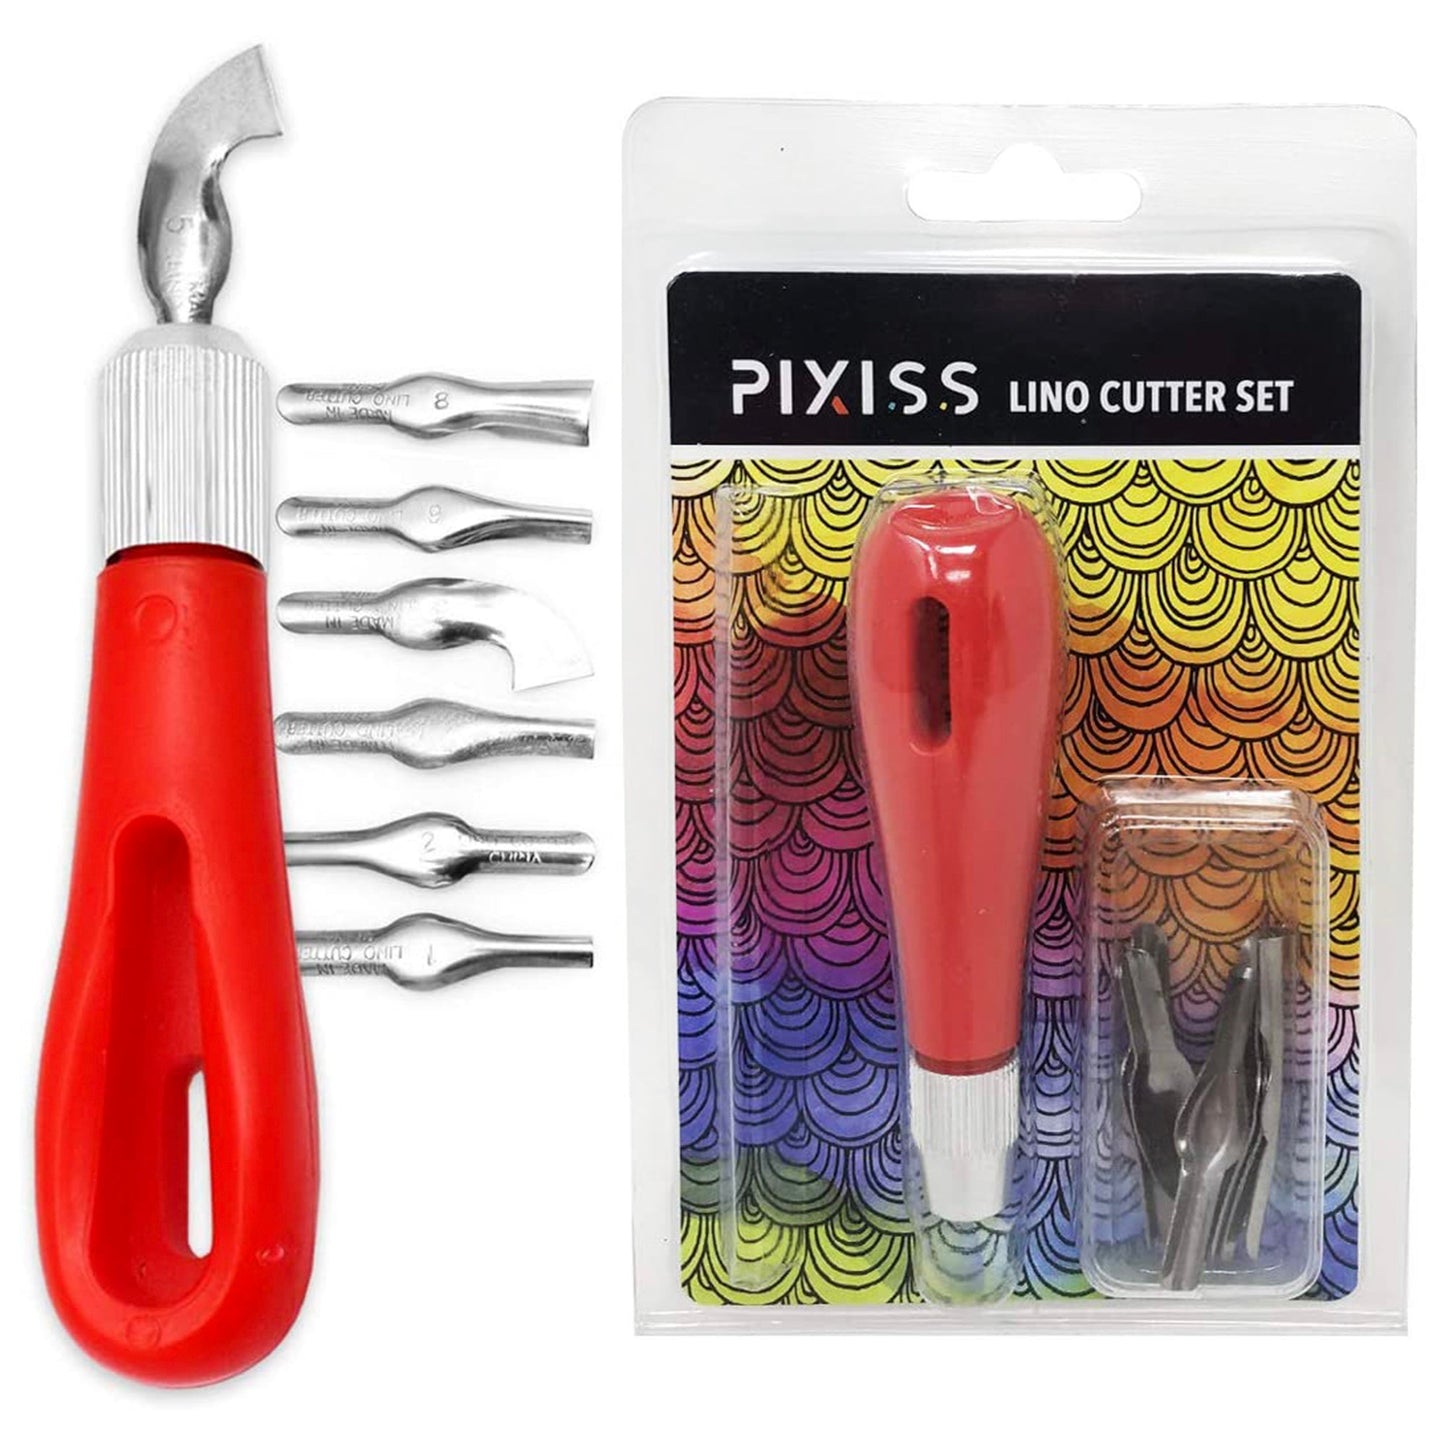 PIXISS Lino Cutter with 6 Cutting Blades by Pixiss